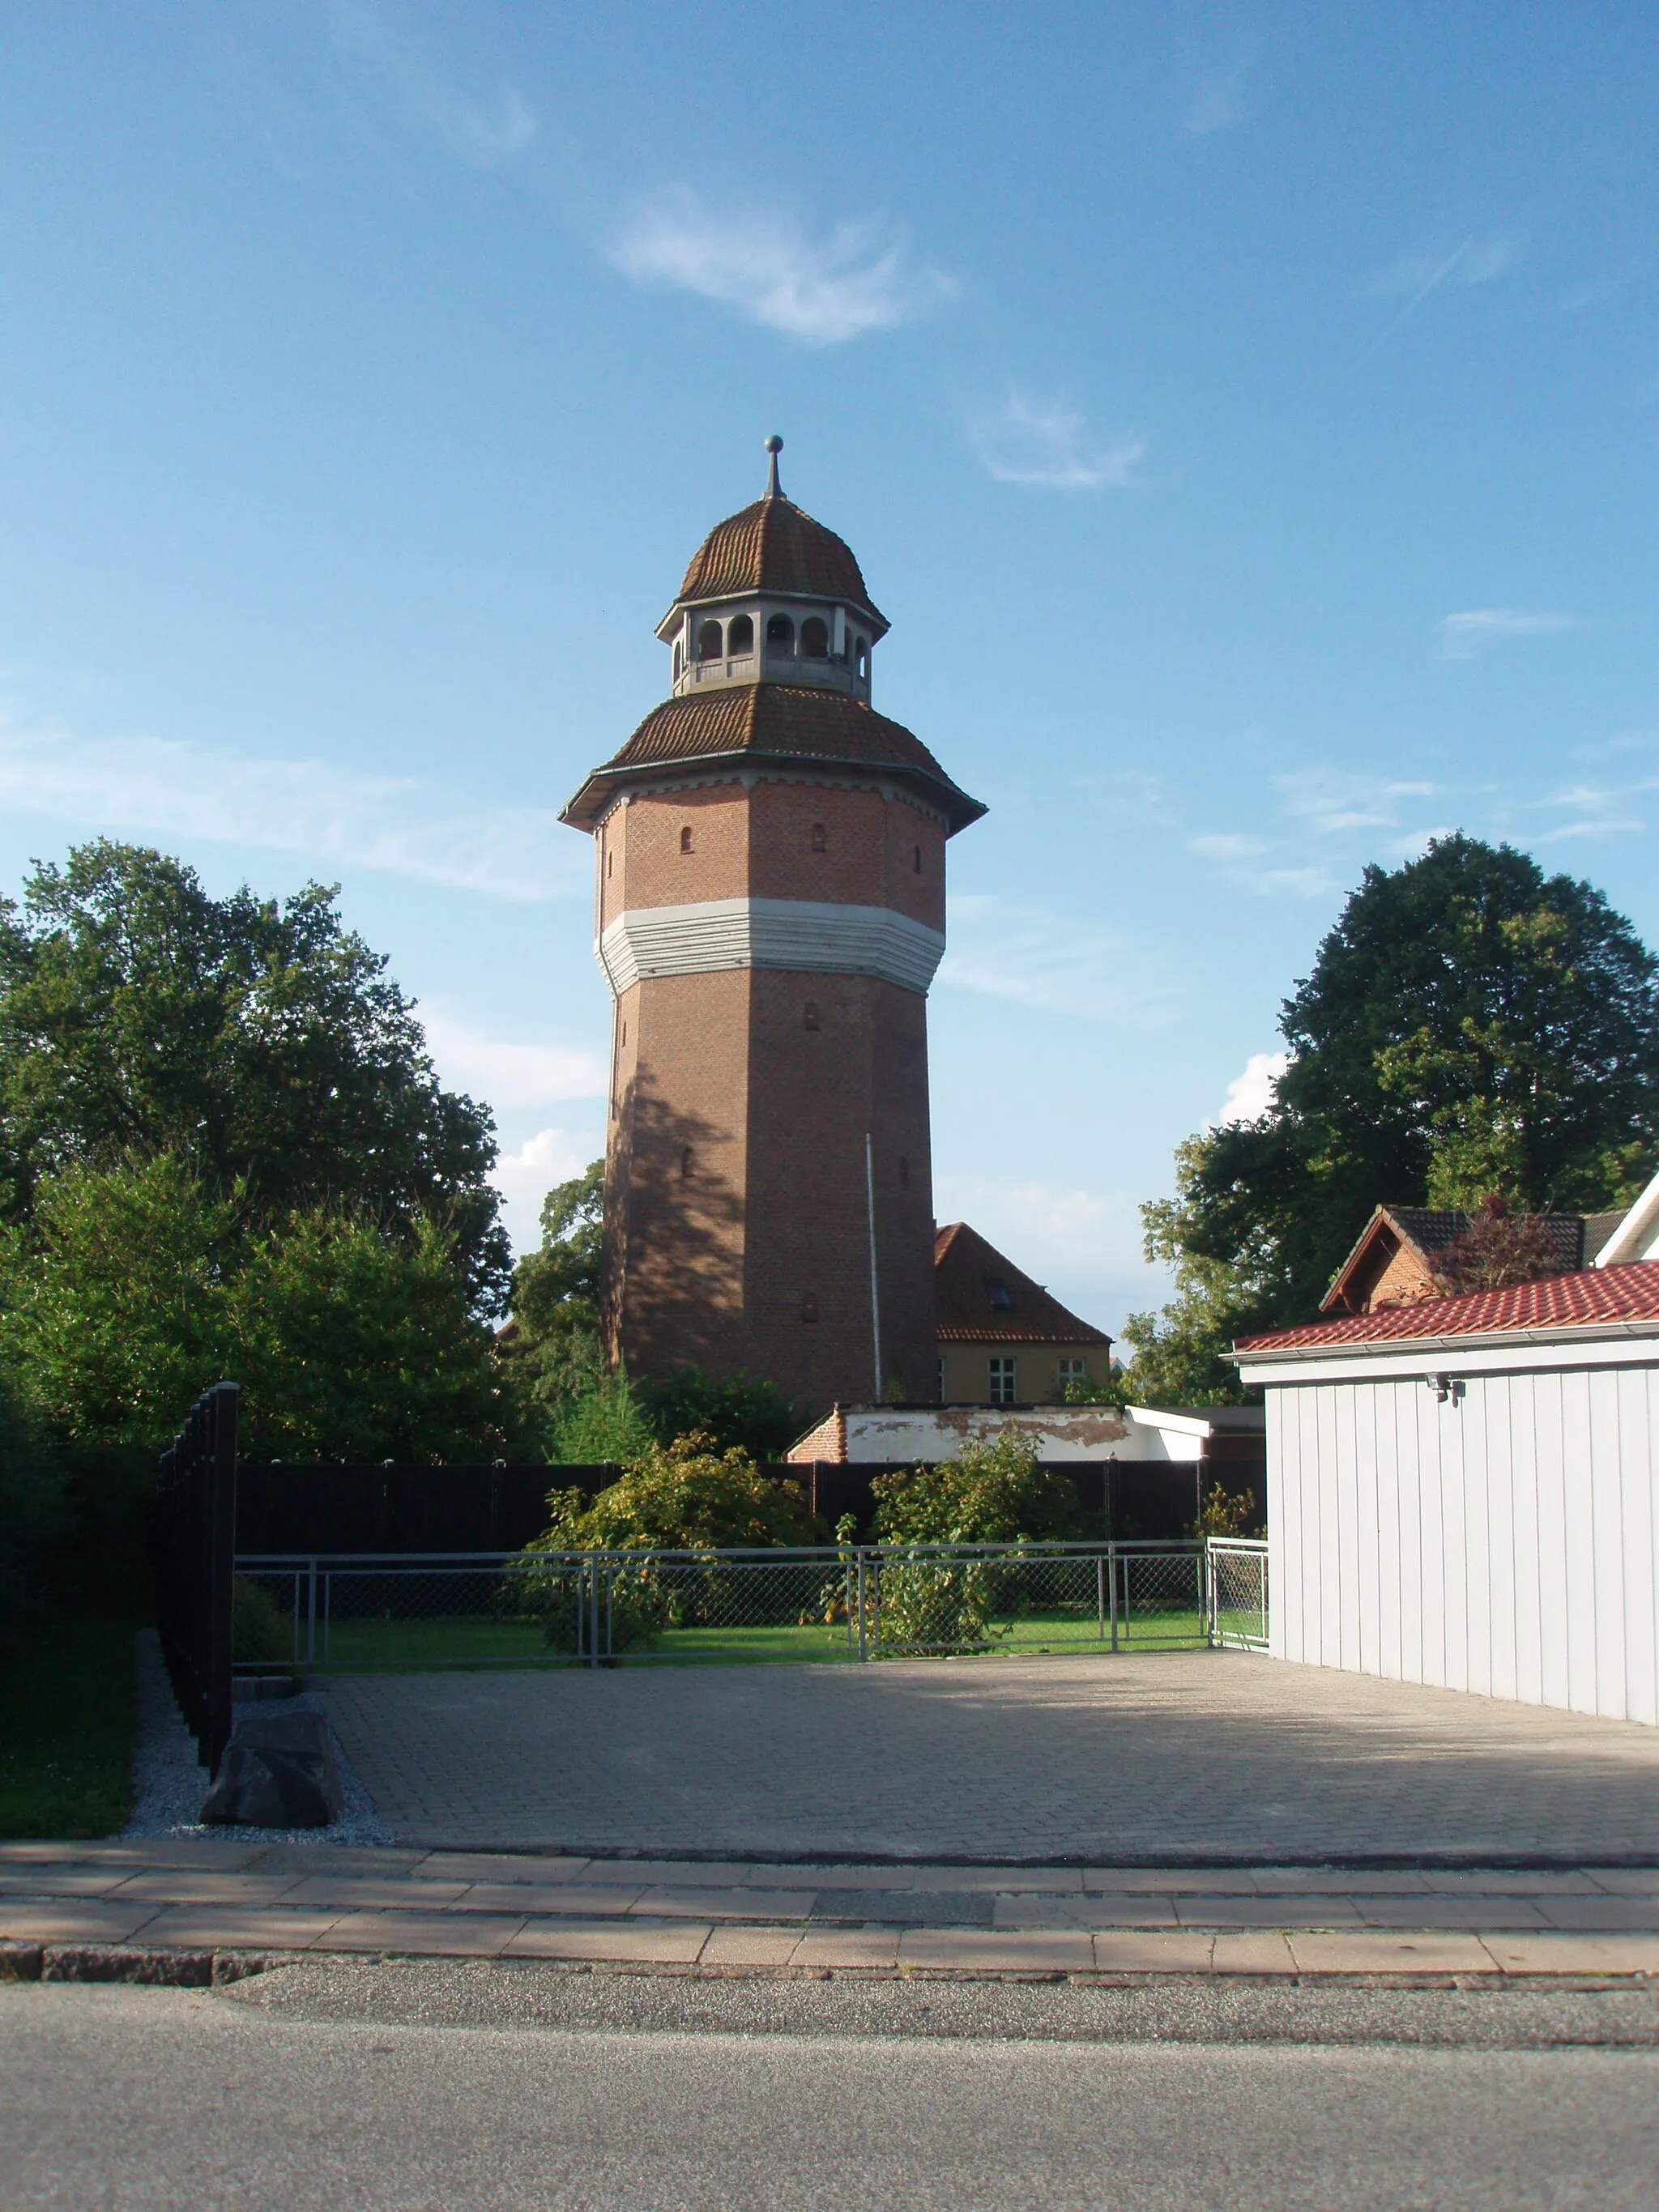 Photo showing: Water tower in Denmark